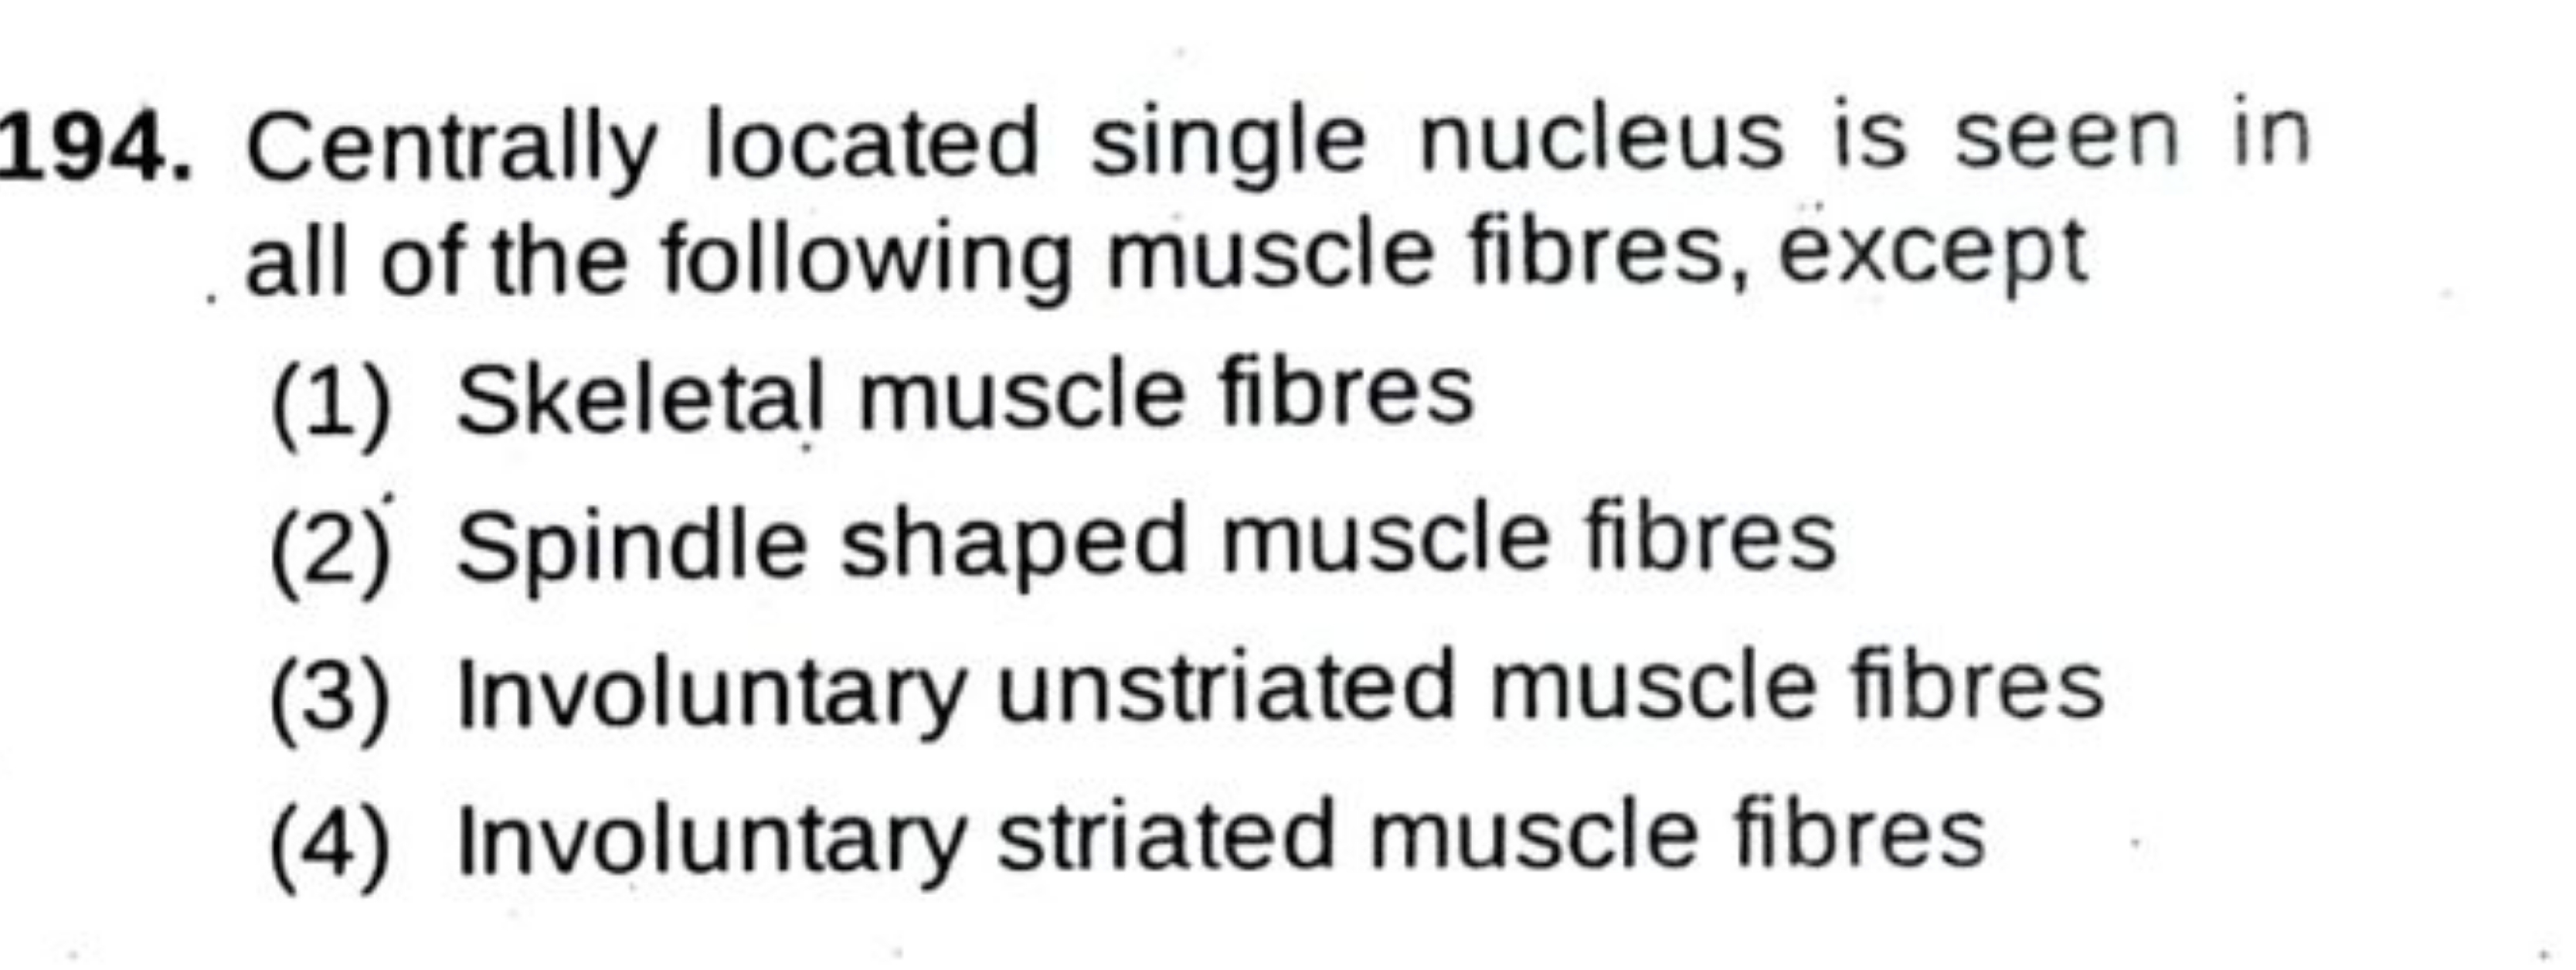 Centrally located single nucleus is seen in all of the following muscl